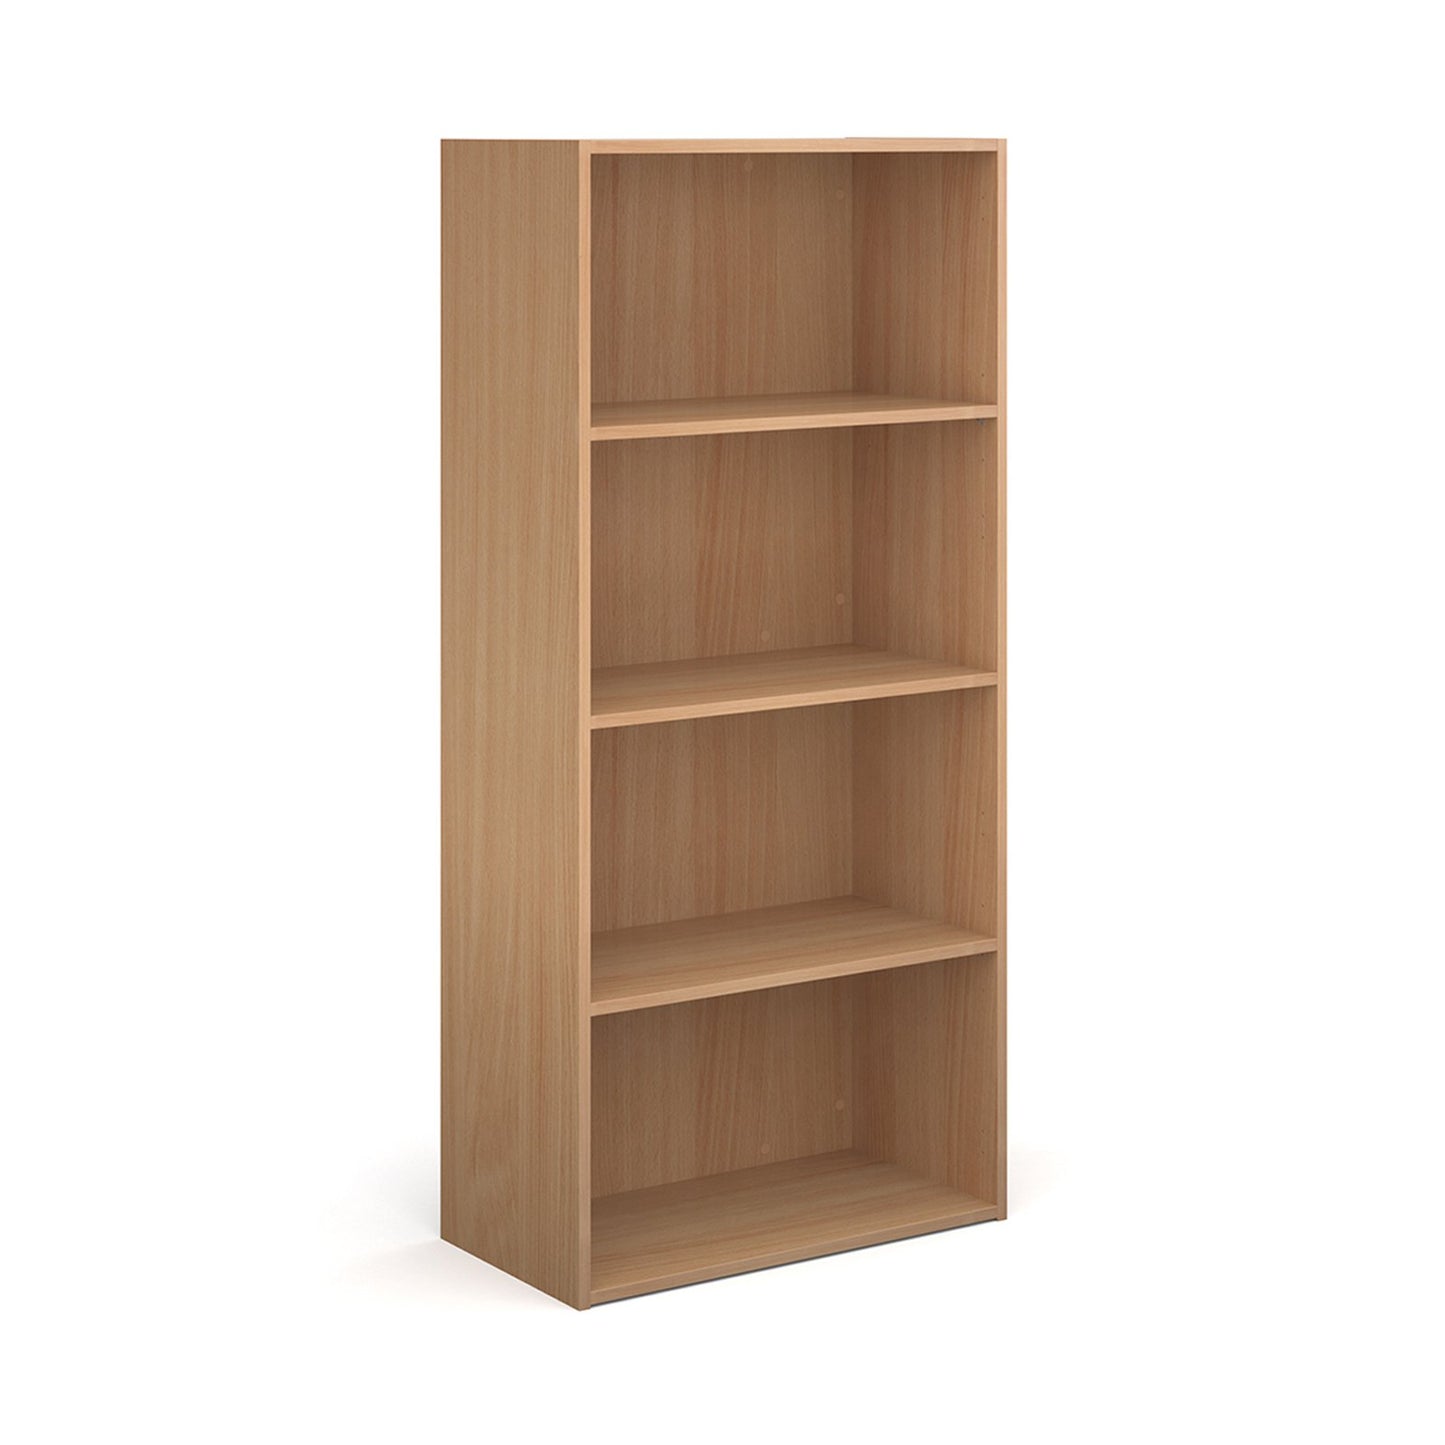 Contract bookcase With Shelves 1230mm High - Oak